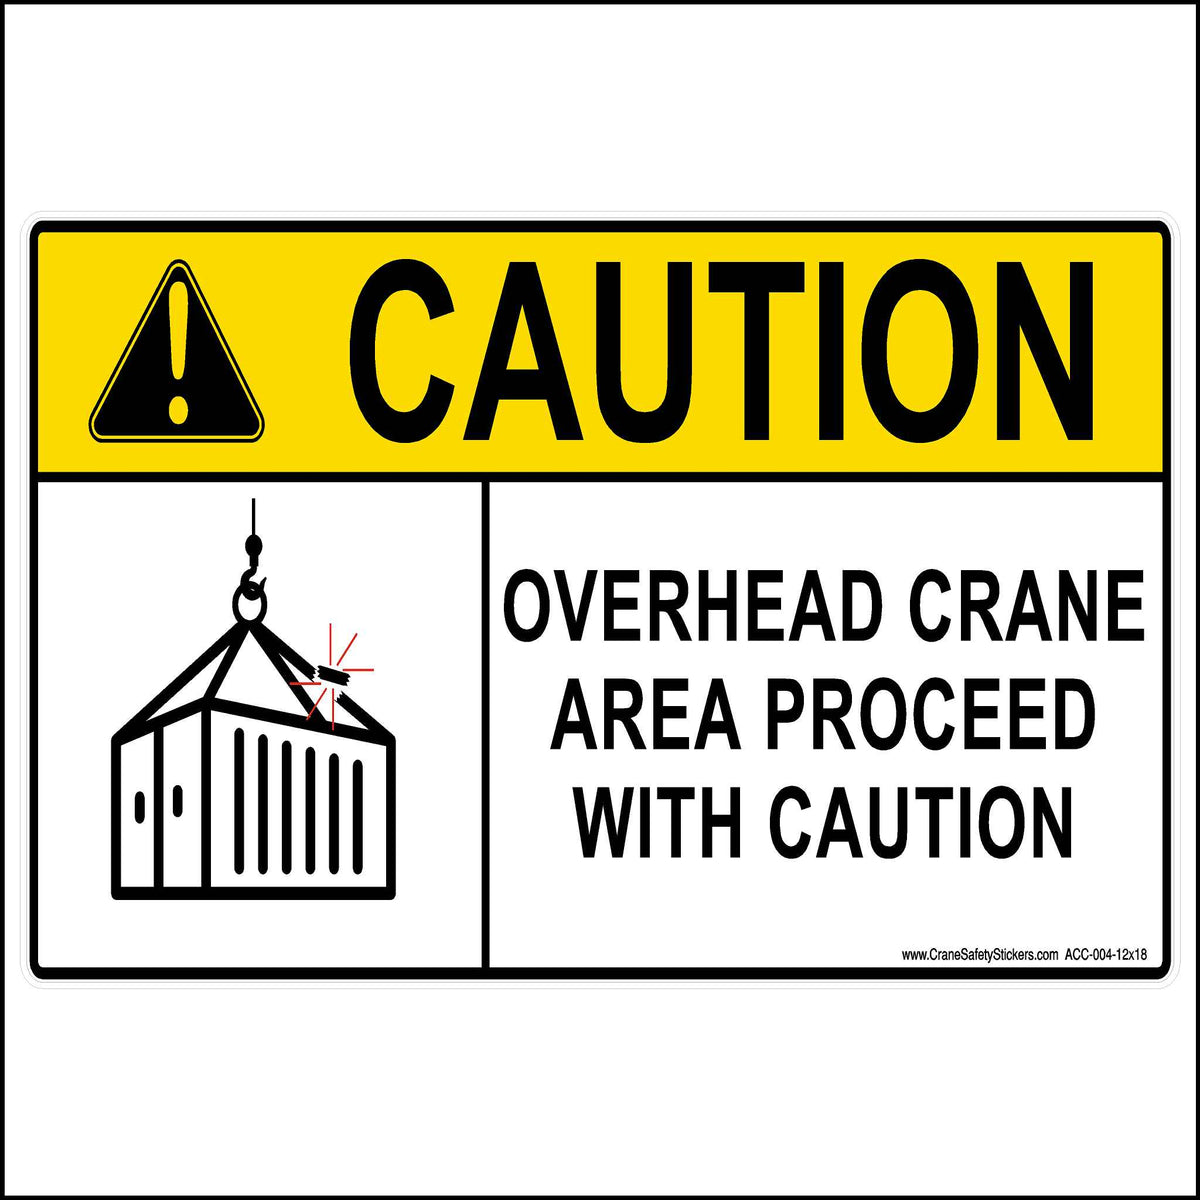 Overhead crane area proceed with caution safety sign 12x18.